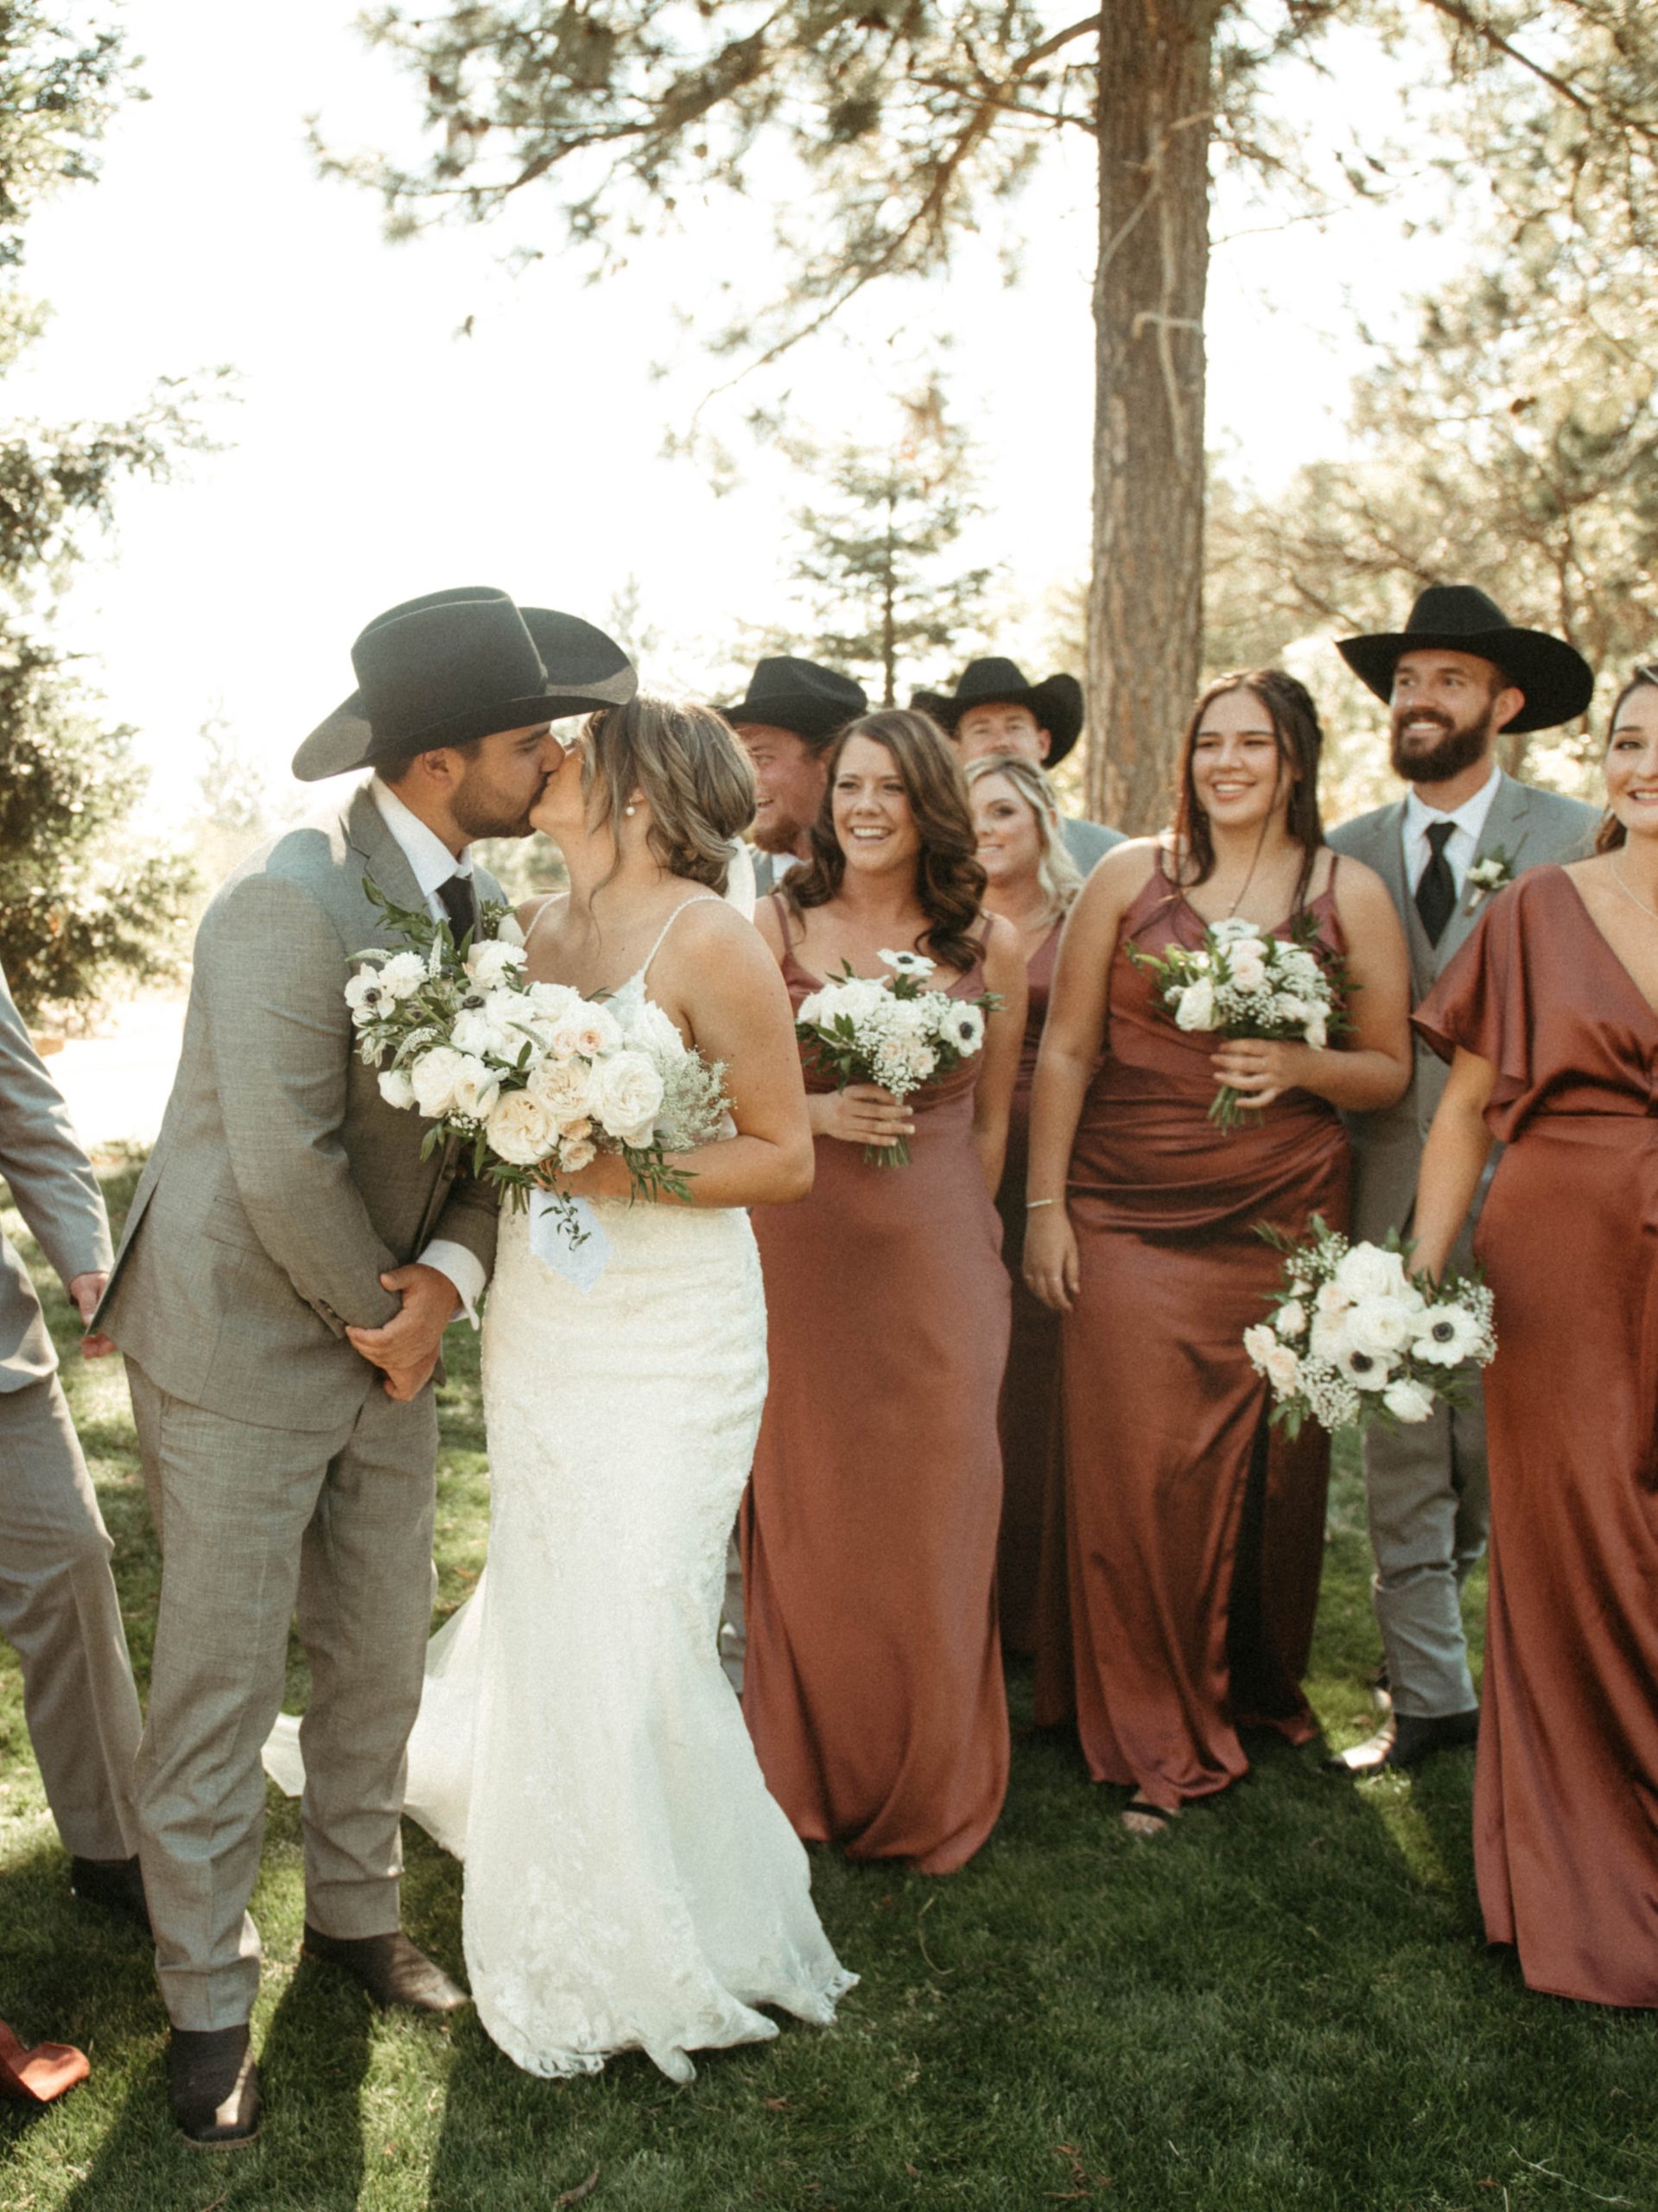 Bride wearing Fontaine by Maggie Sottero kisses her husband in front of bridesmaids and groomsmen